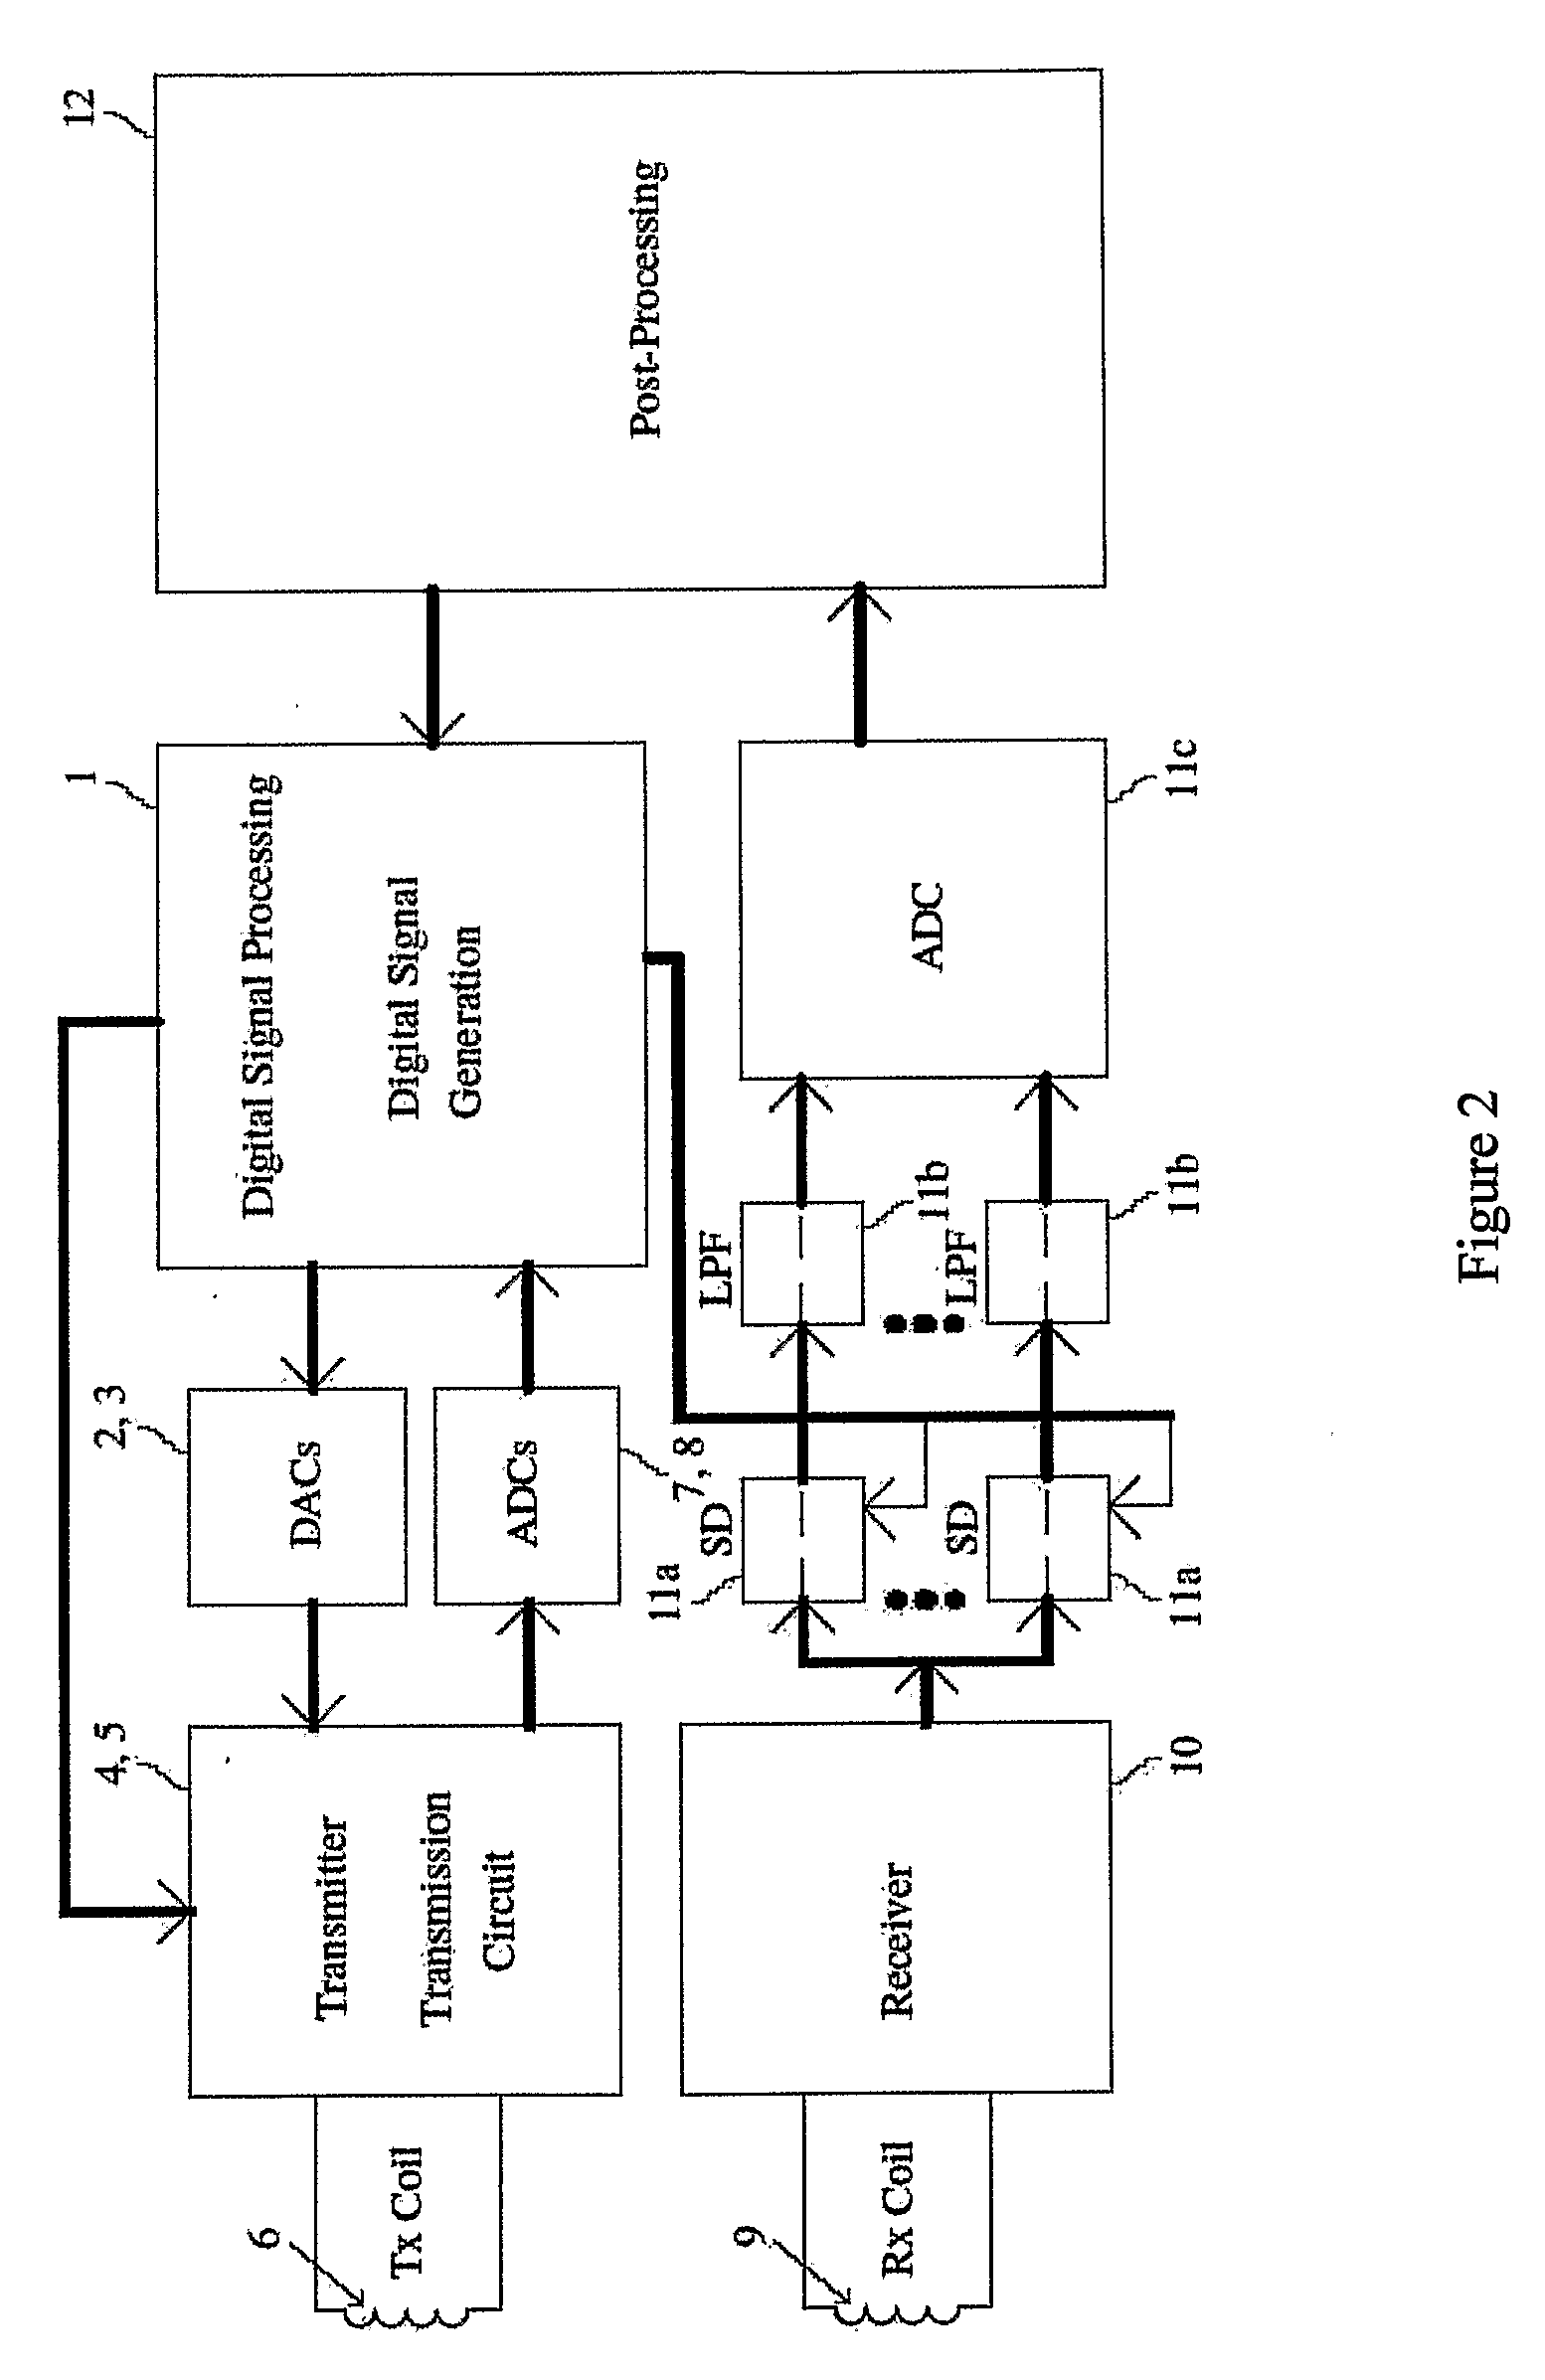 Method and Apparatus for Metal Detection Employing Digital Signal Processing